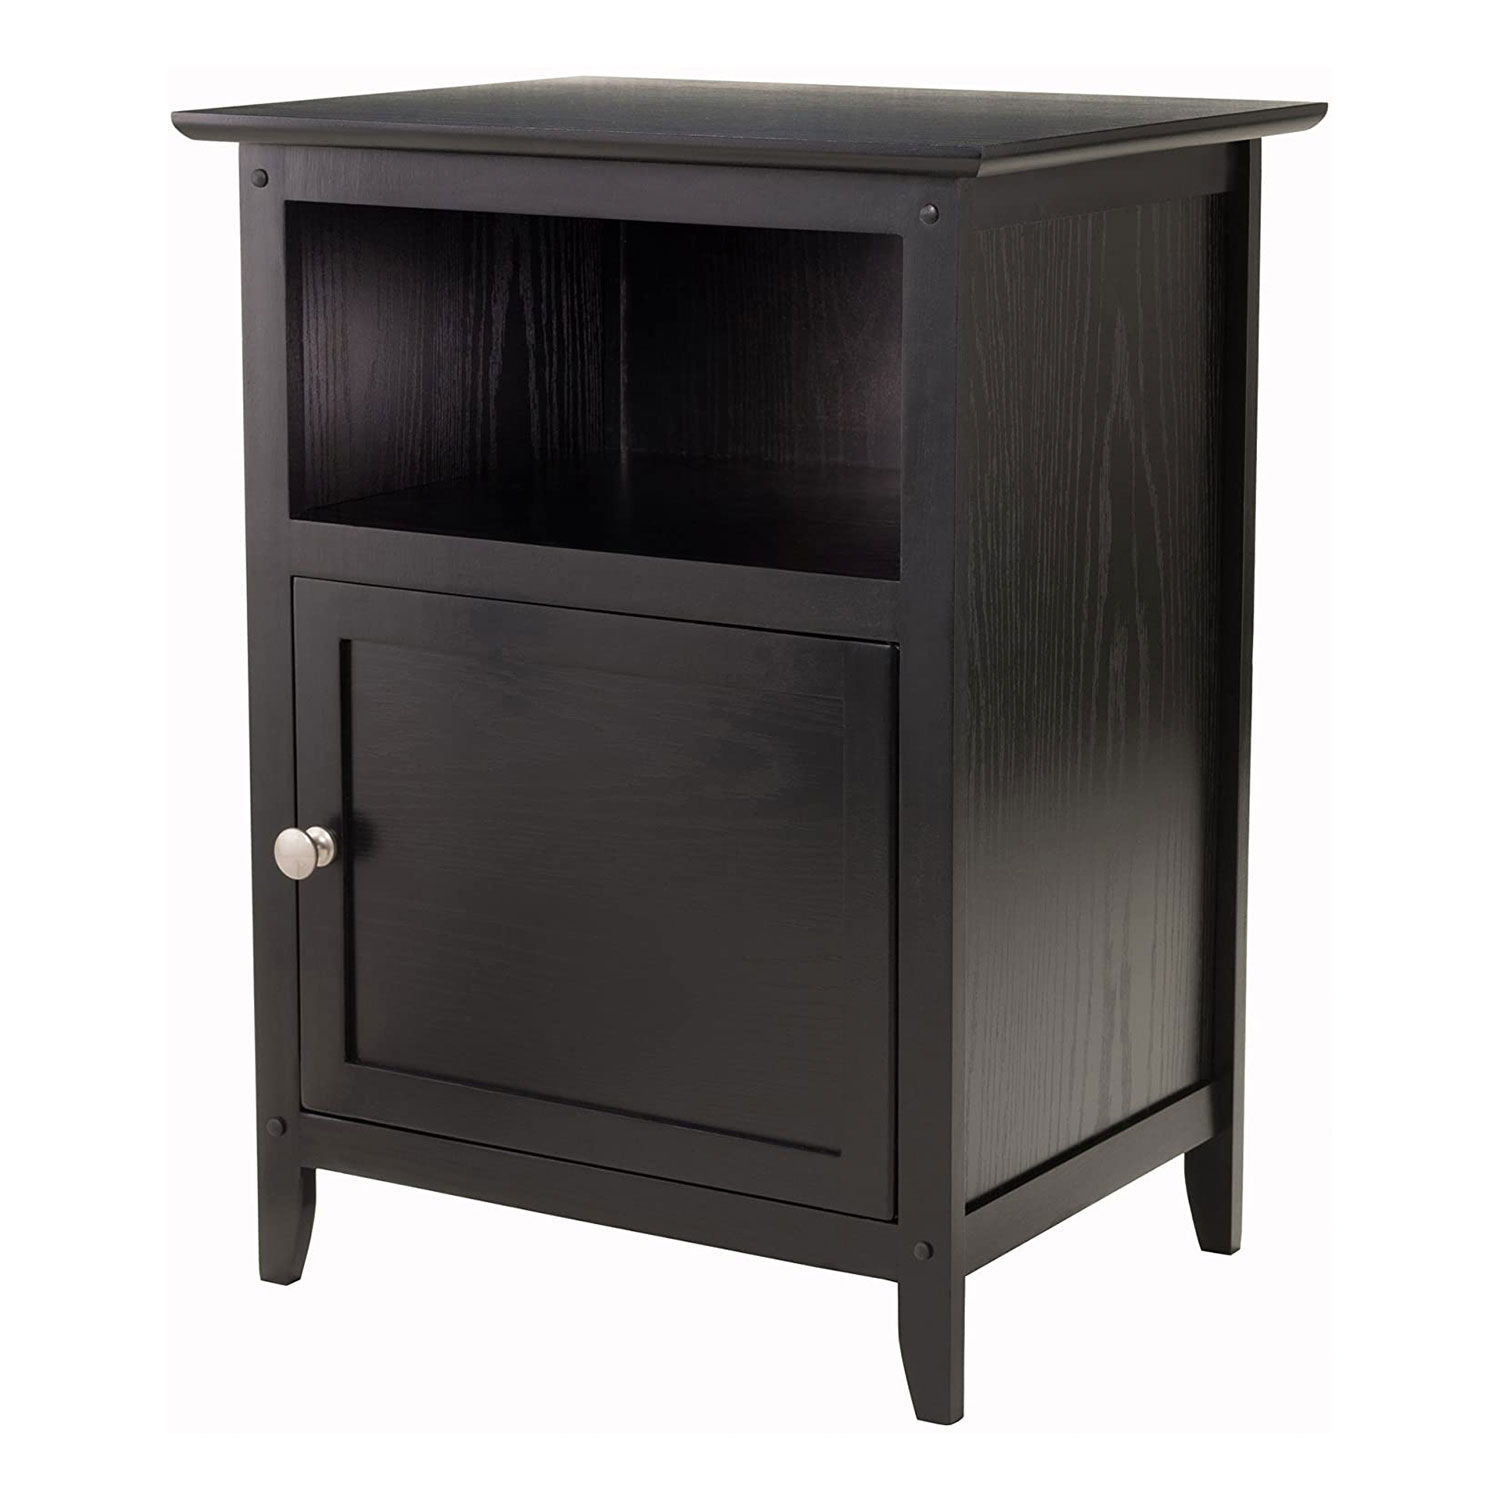 Winsome Home Indoor Decor End Or Night Table - Black - image 1 of 3